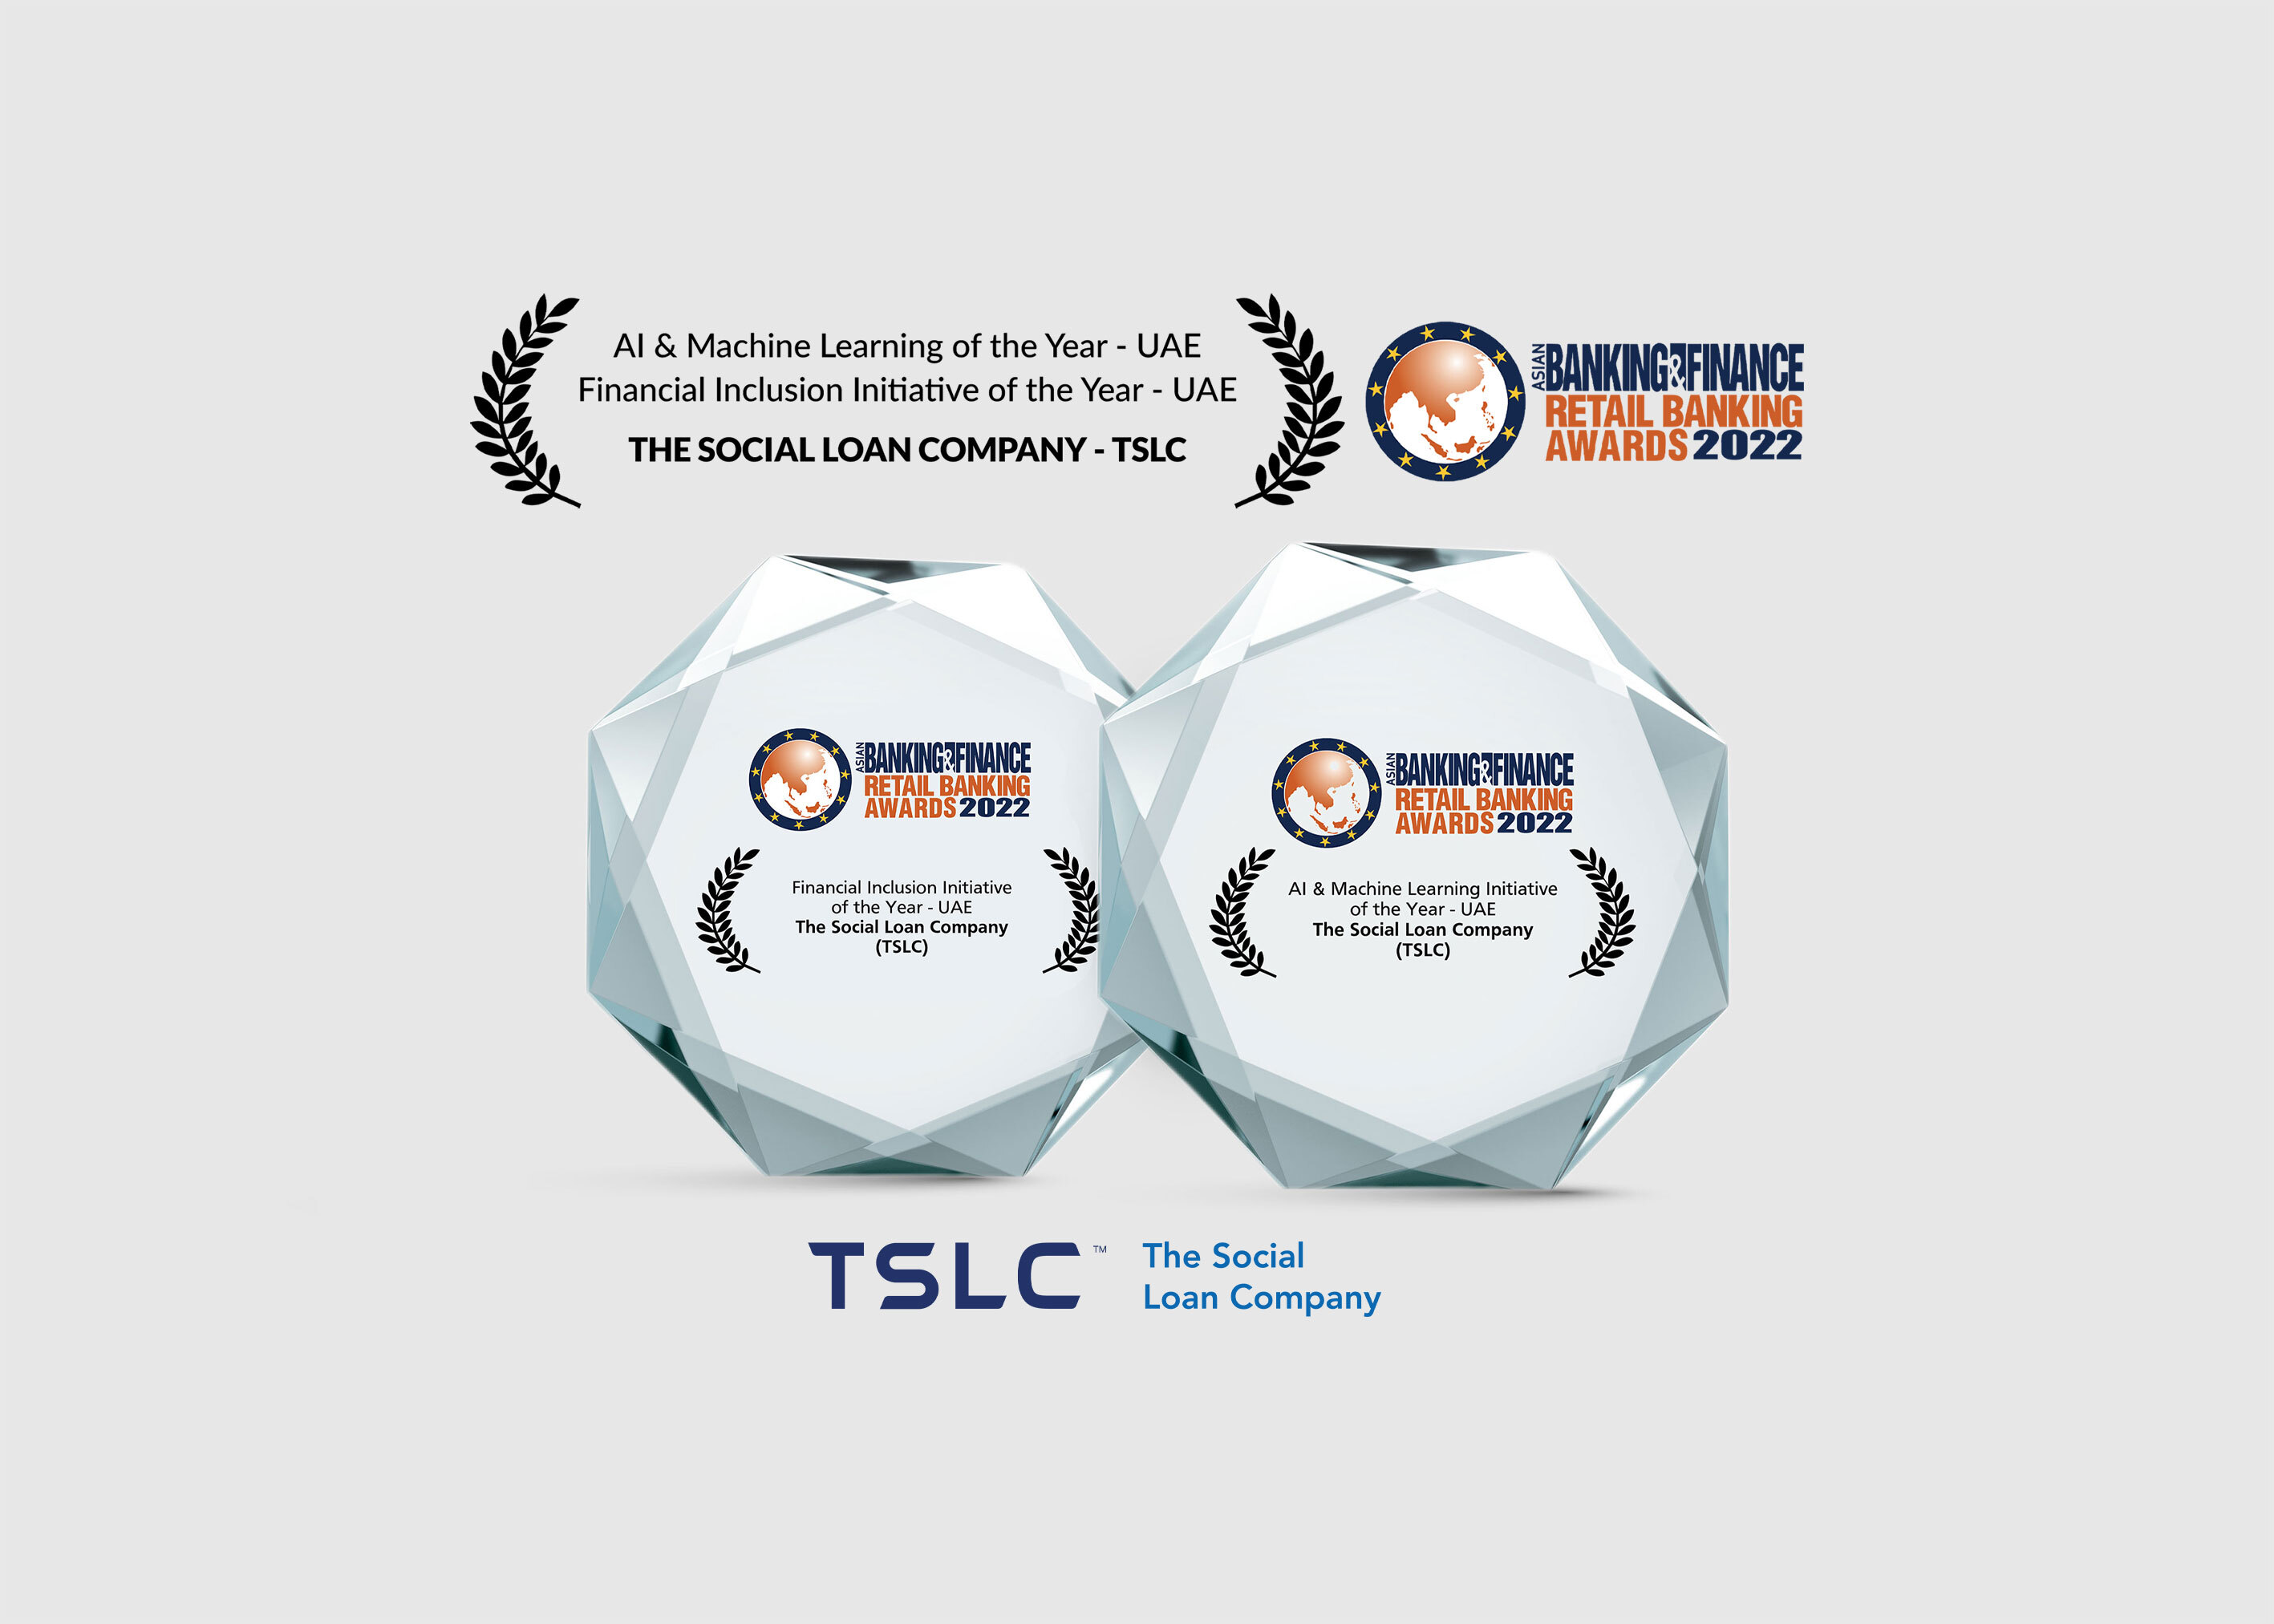 LendTech Innovator TSLC Wins Two Awards at the 2022 ABF Wholesale and Retail Banking Awards thumbnail